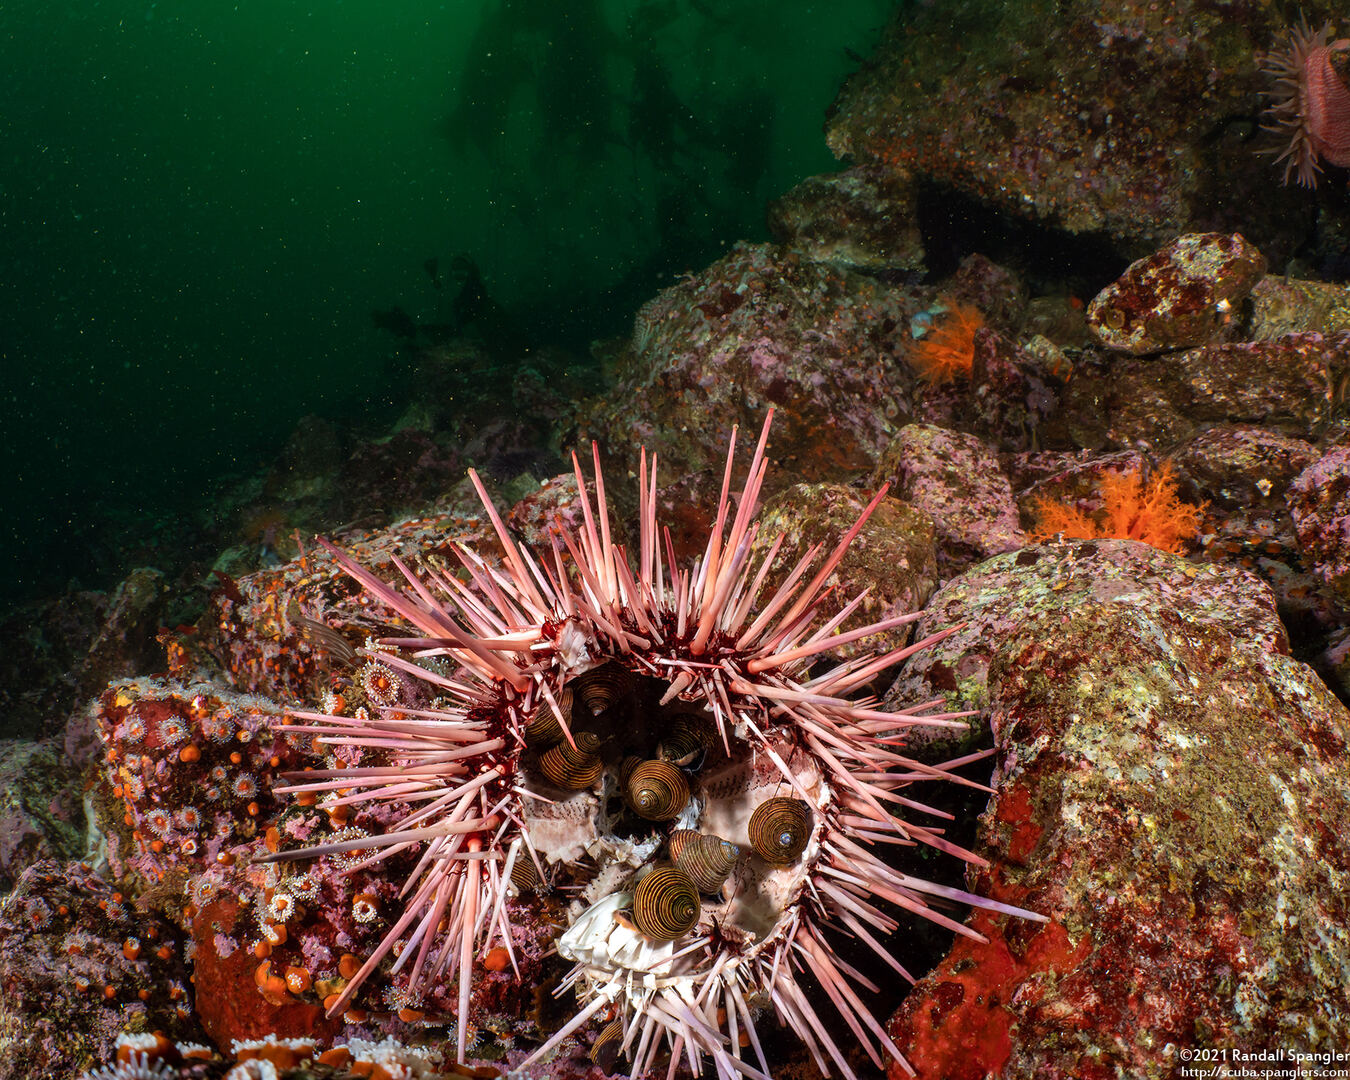 Mesocentrotus franciscanus (Red Sea Urchin); Snails eating dead urchin